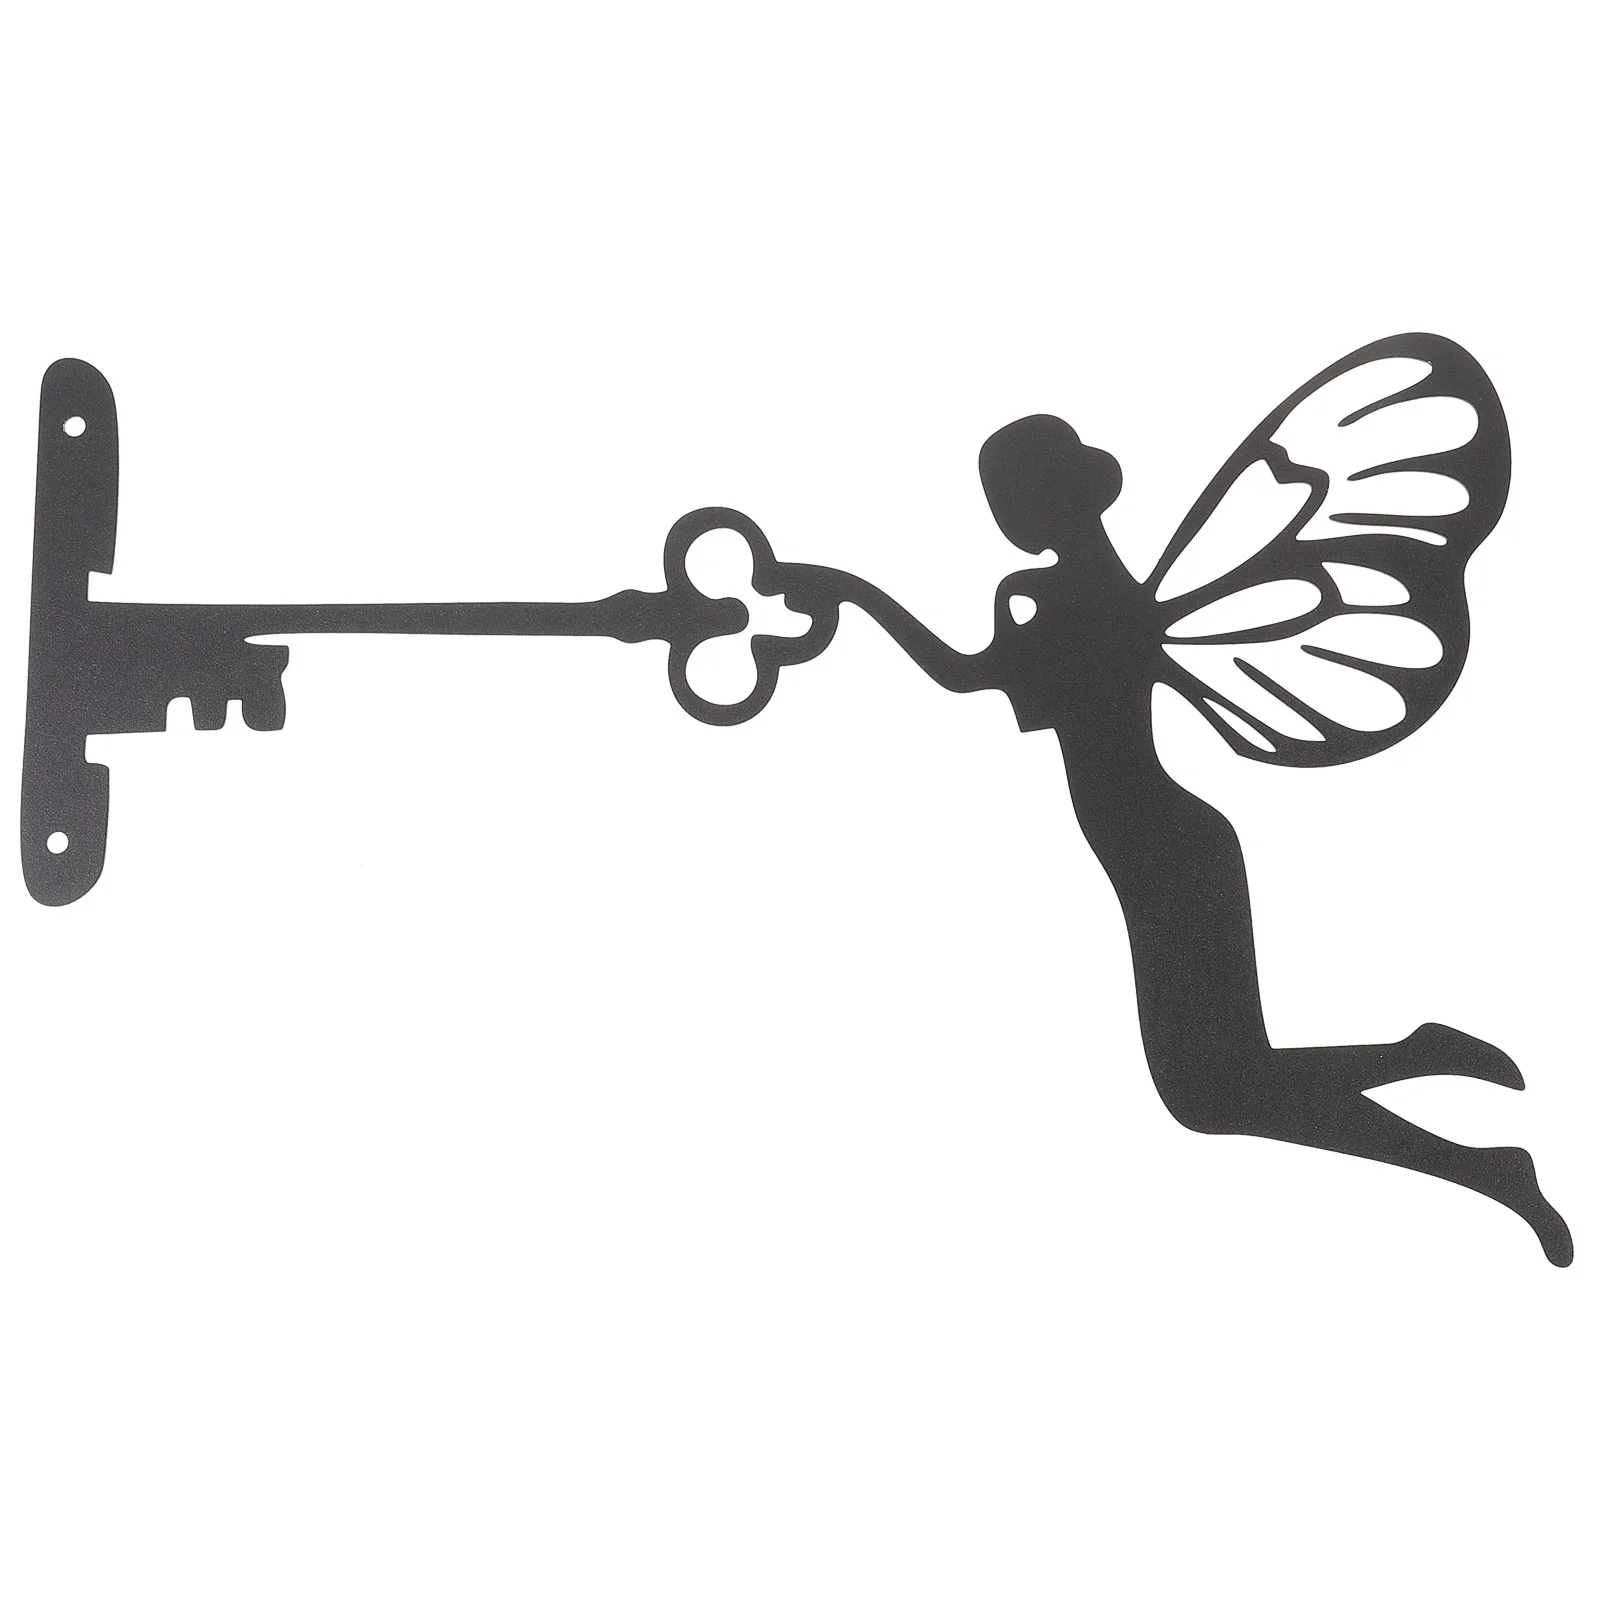 

Garden Decorative Sculpture Metal Fairy Wall Hanging Decor Tree Decoration Statue Signs Silhouette Holding Key Home